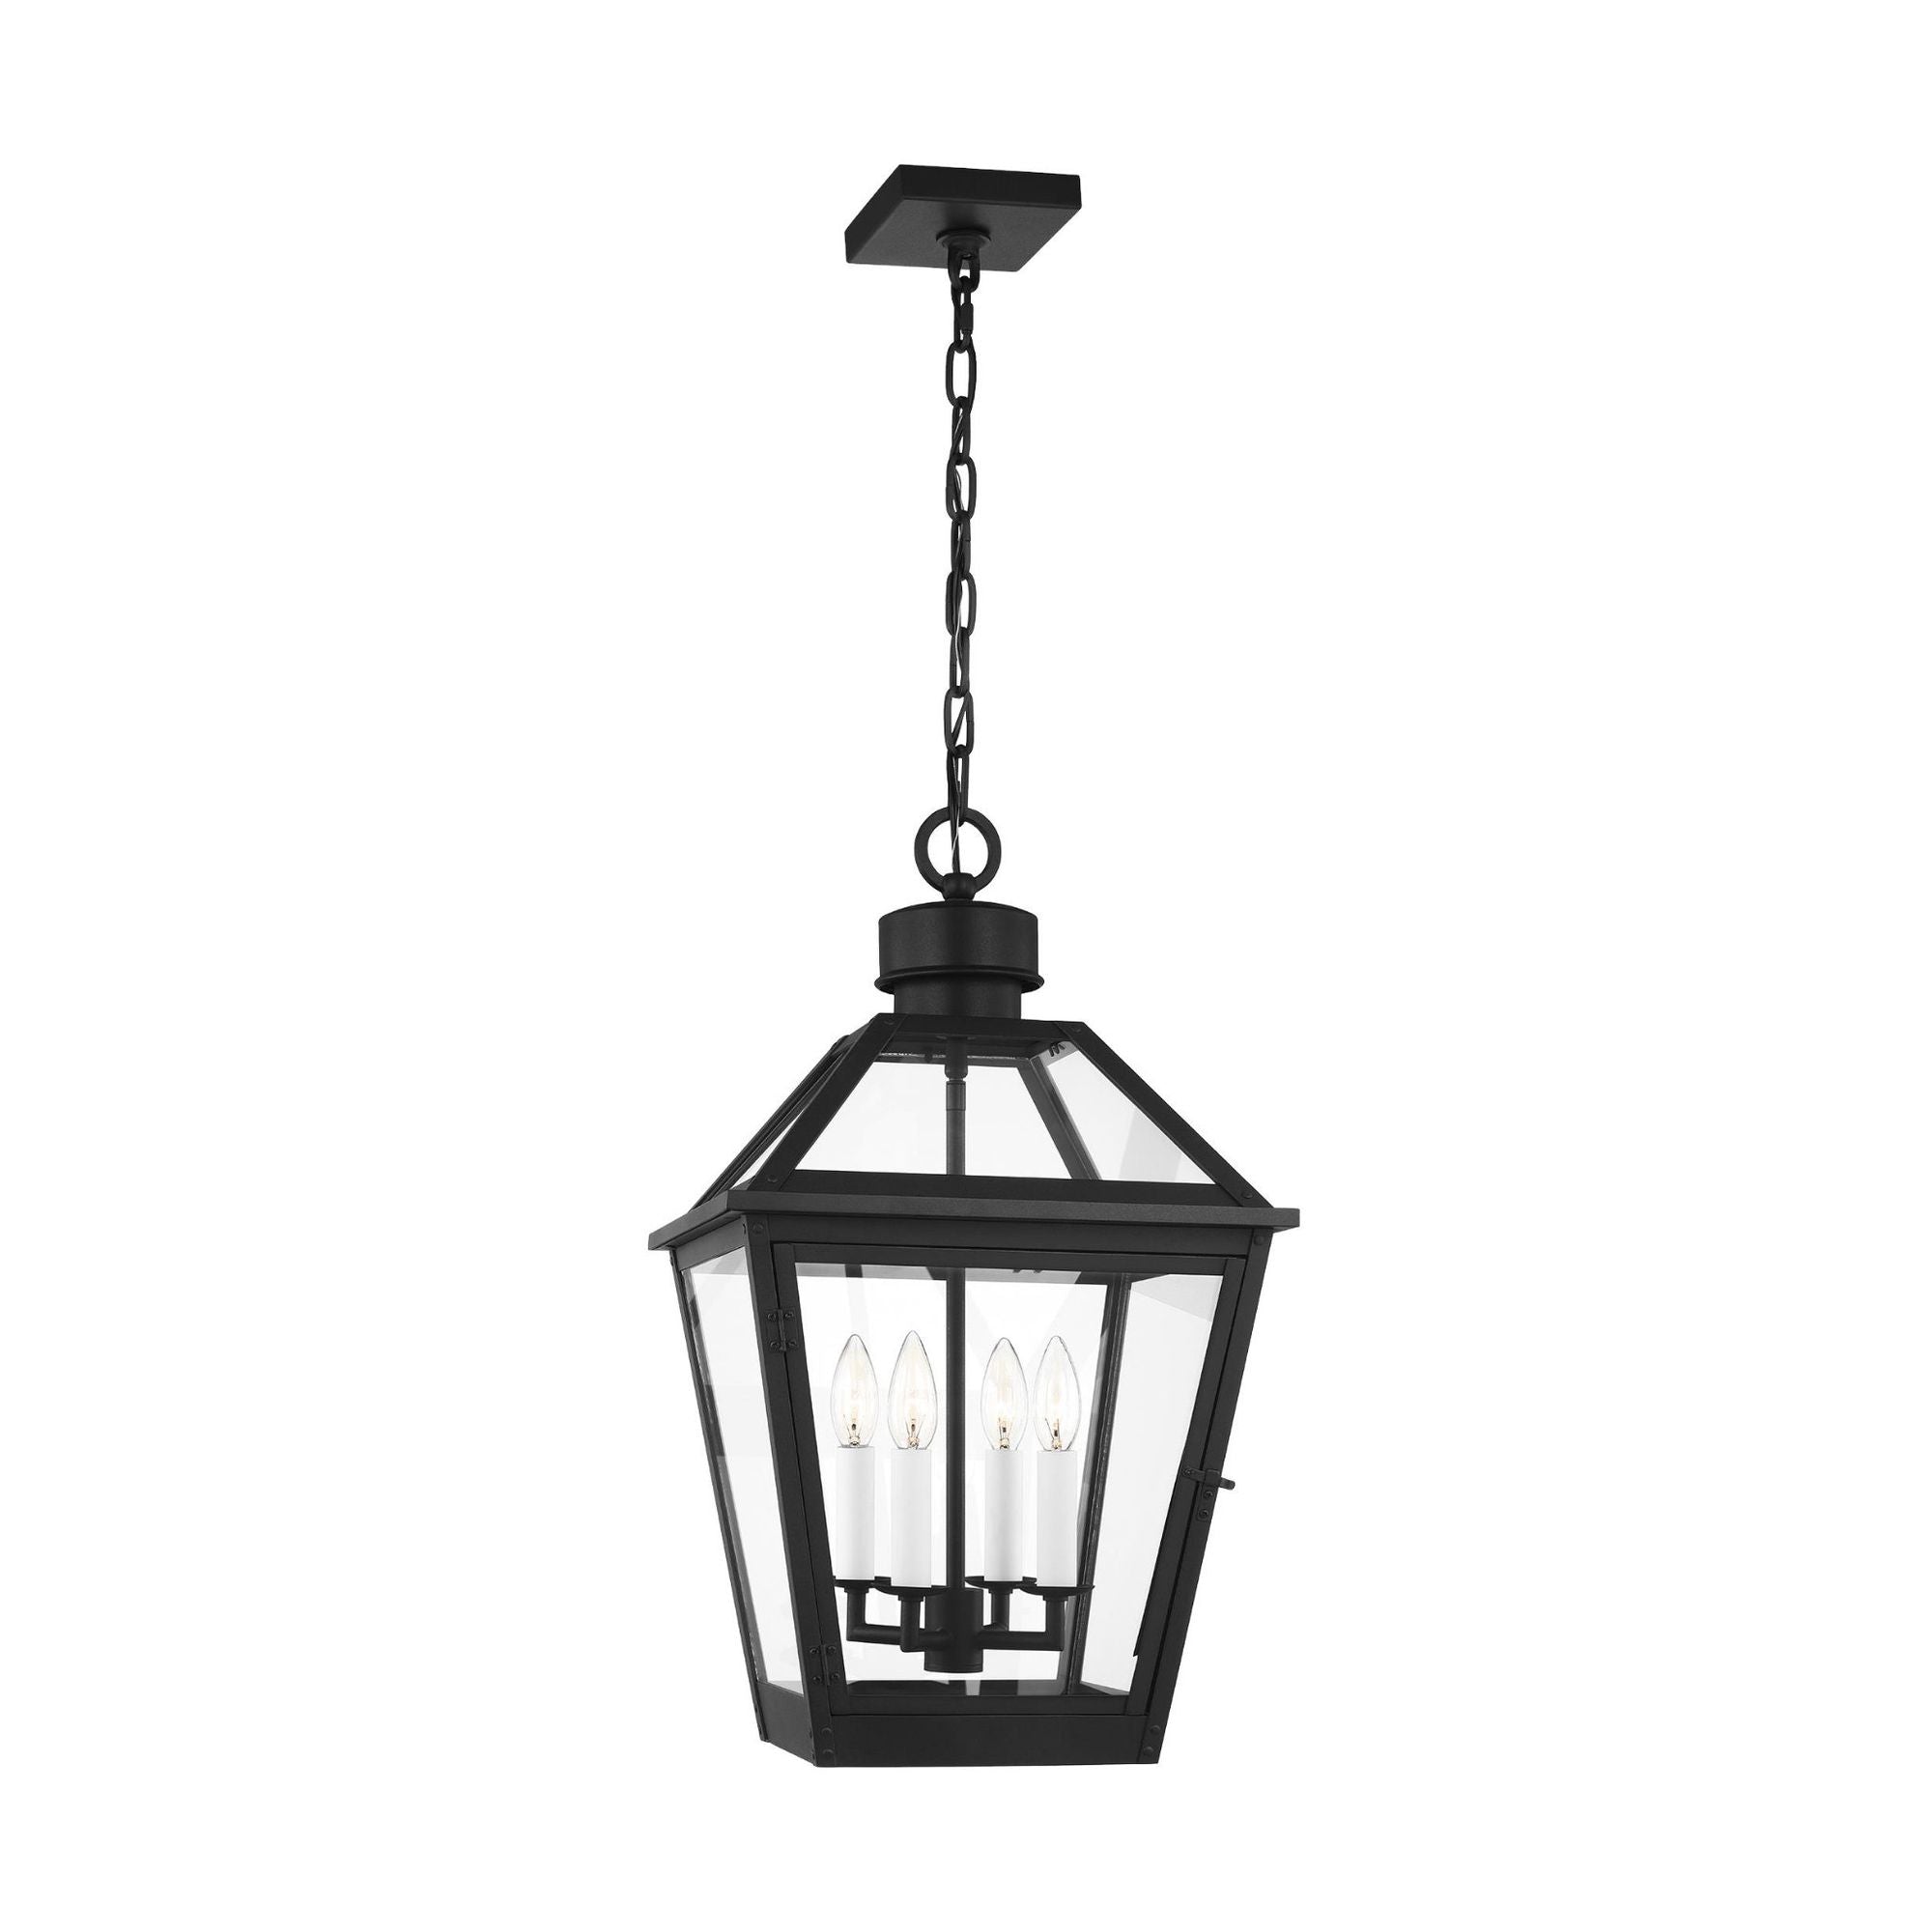 Chapman & Myers Hyannis Large Pendant in Textured Black